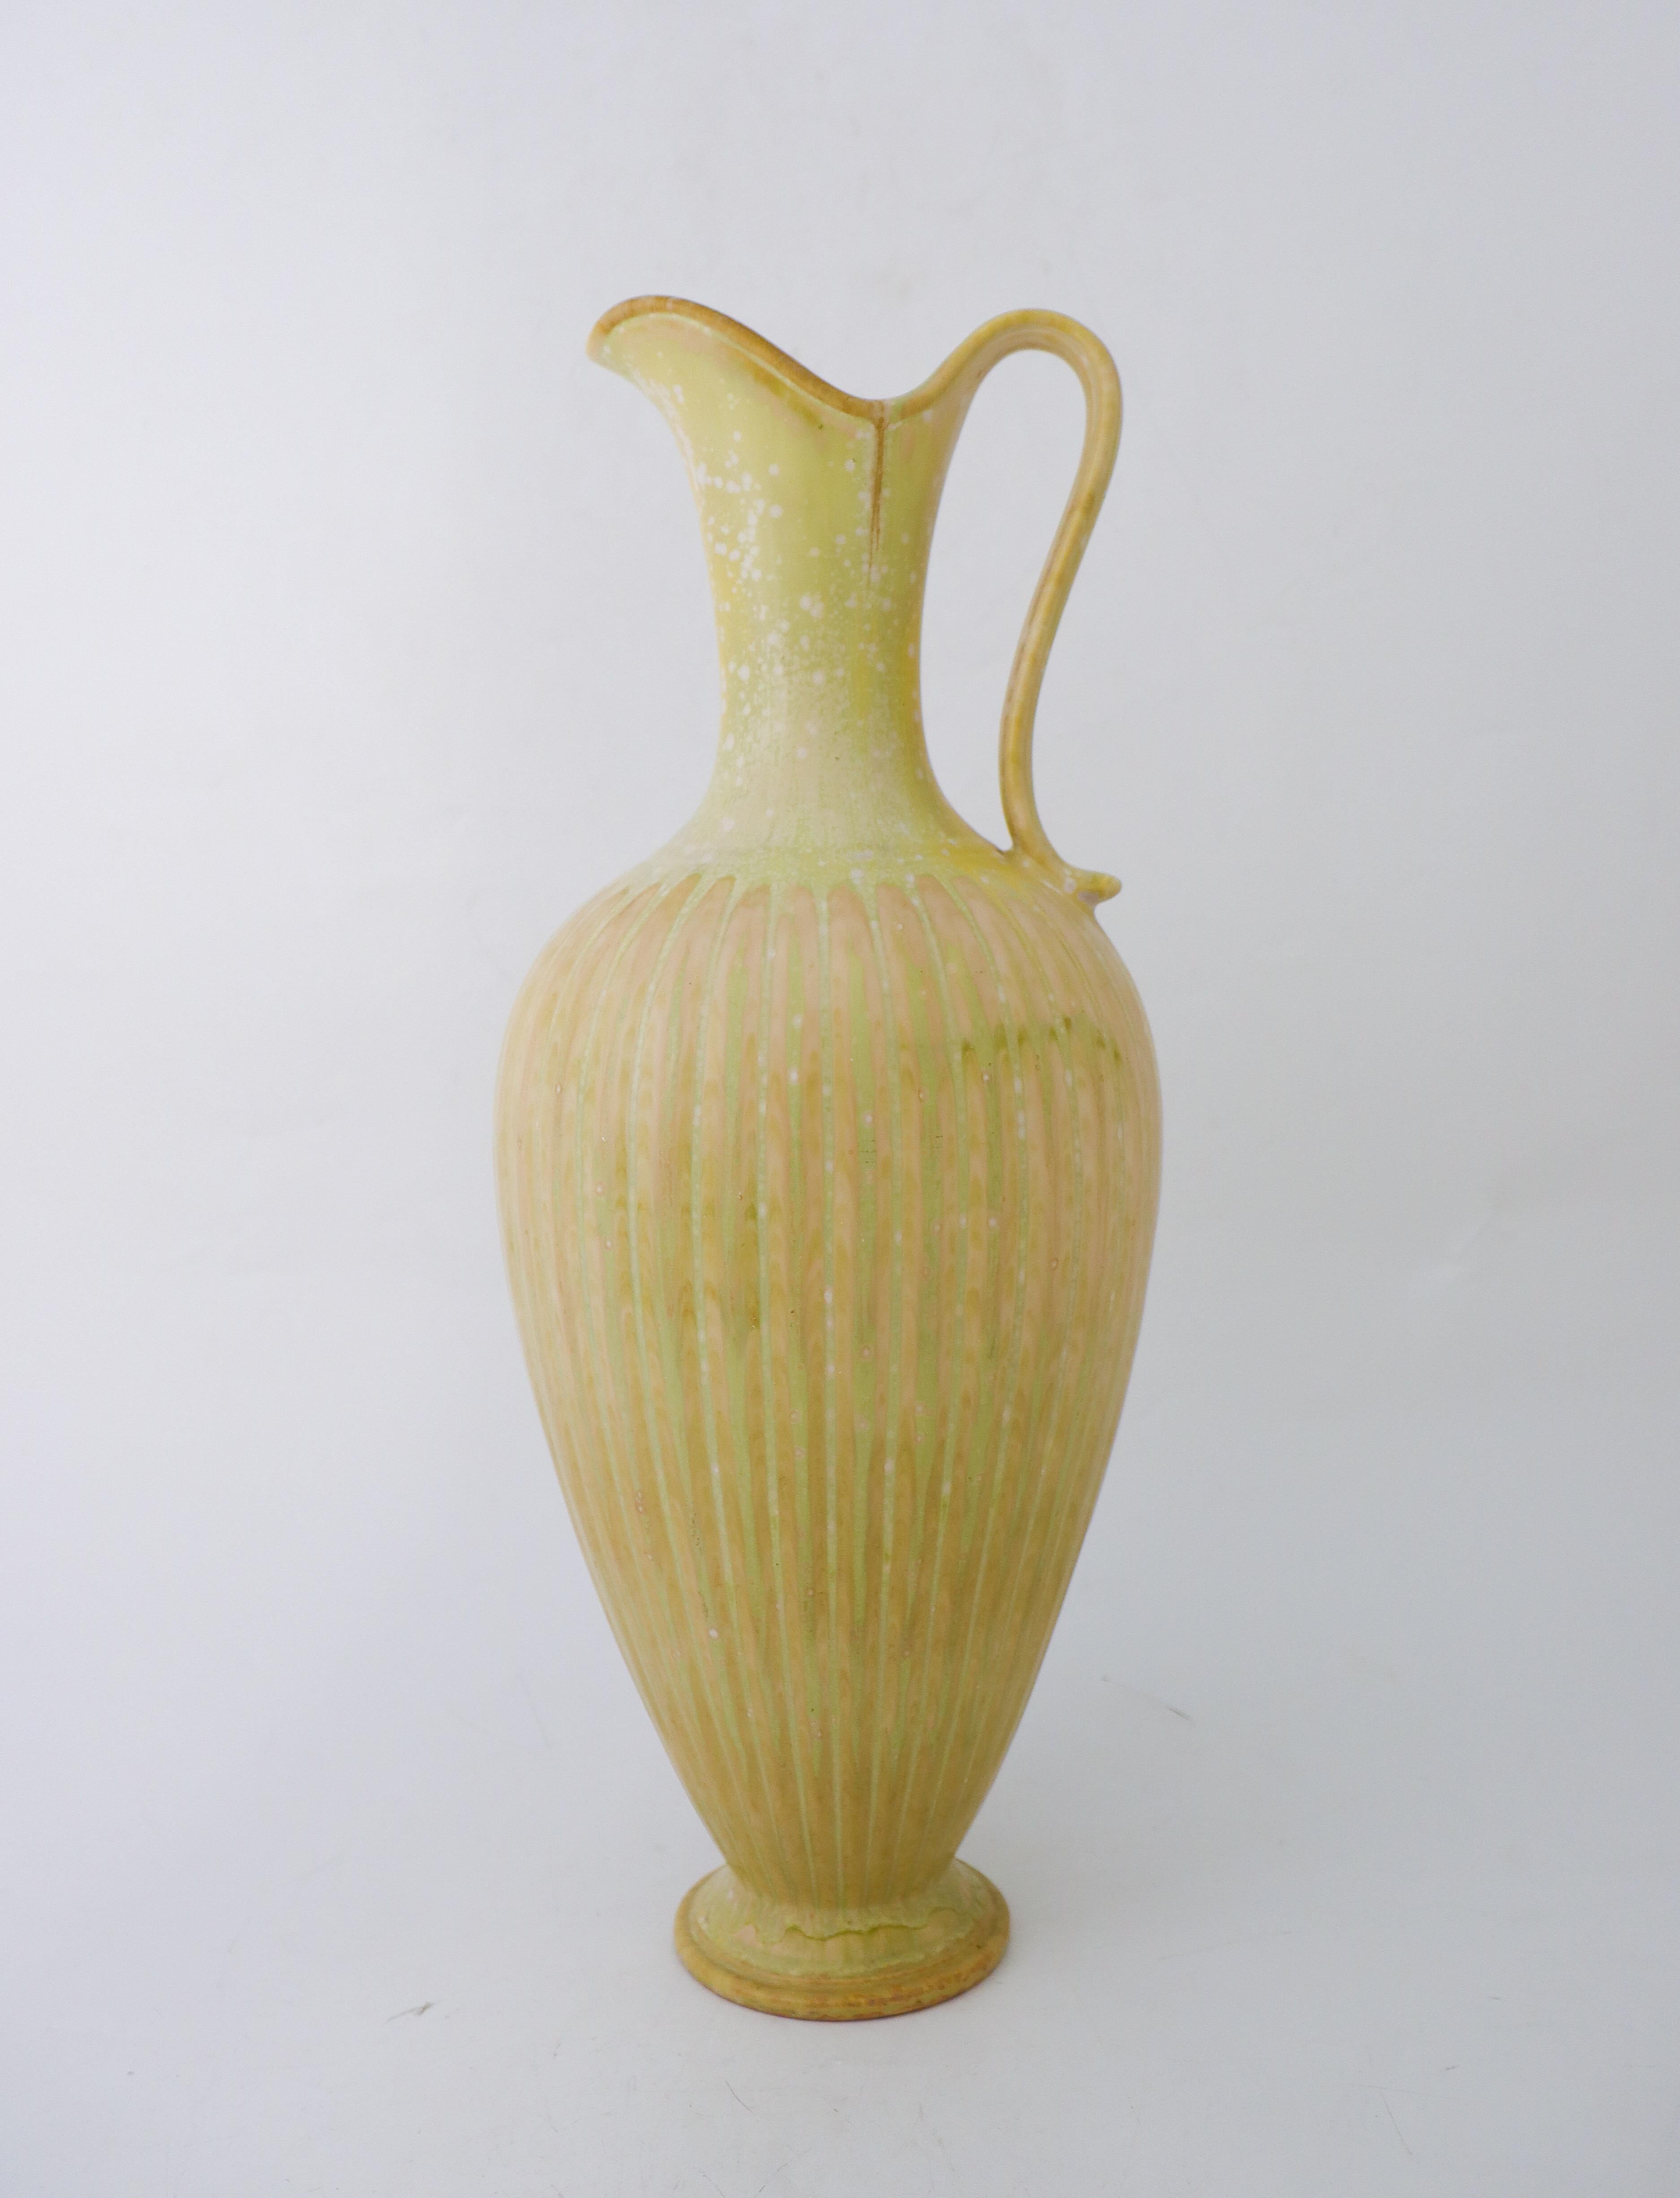 A large floor vase with handle with a lovely green speckled glaze designed by Gunnar Nylund at Rörstrand, it´s 45 cm (18